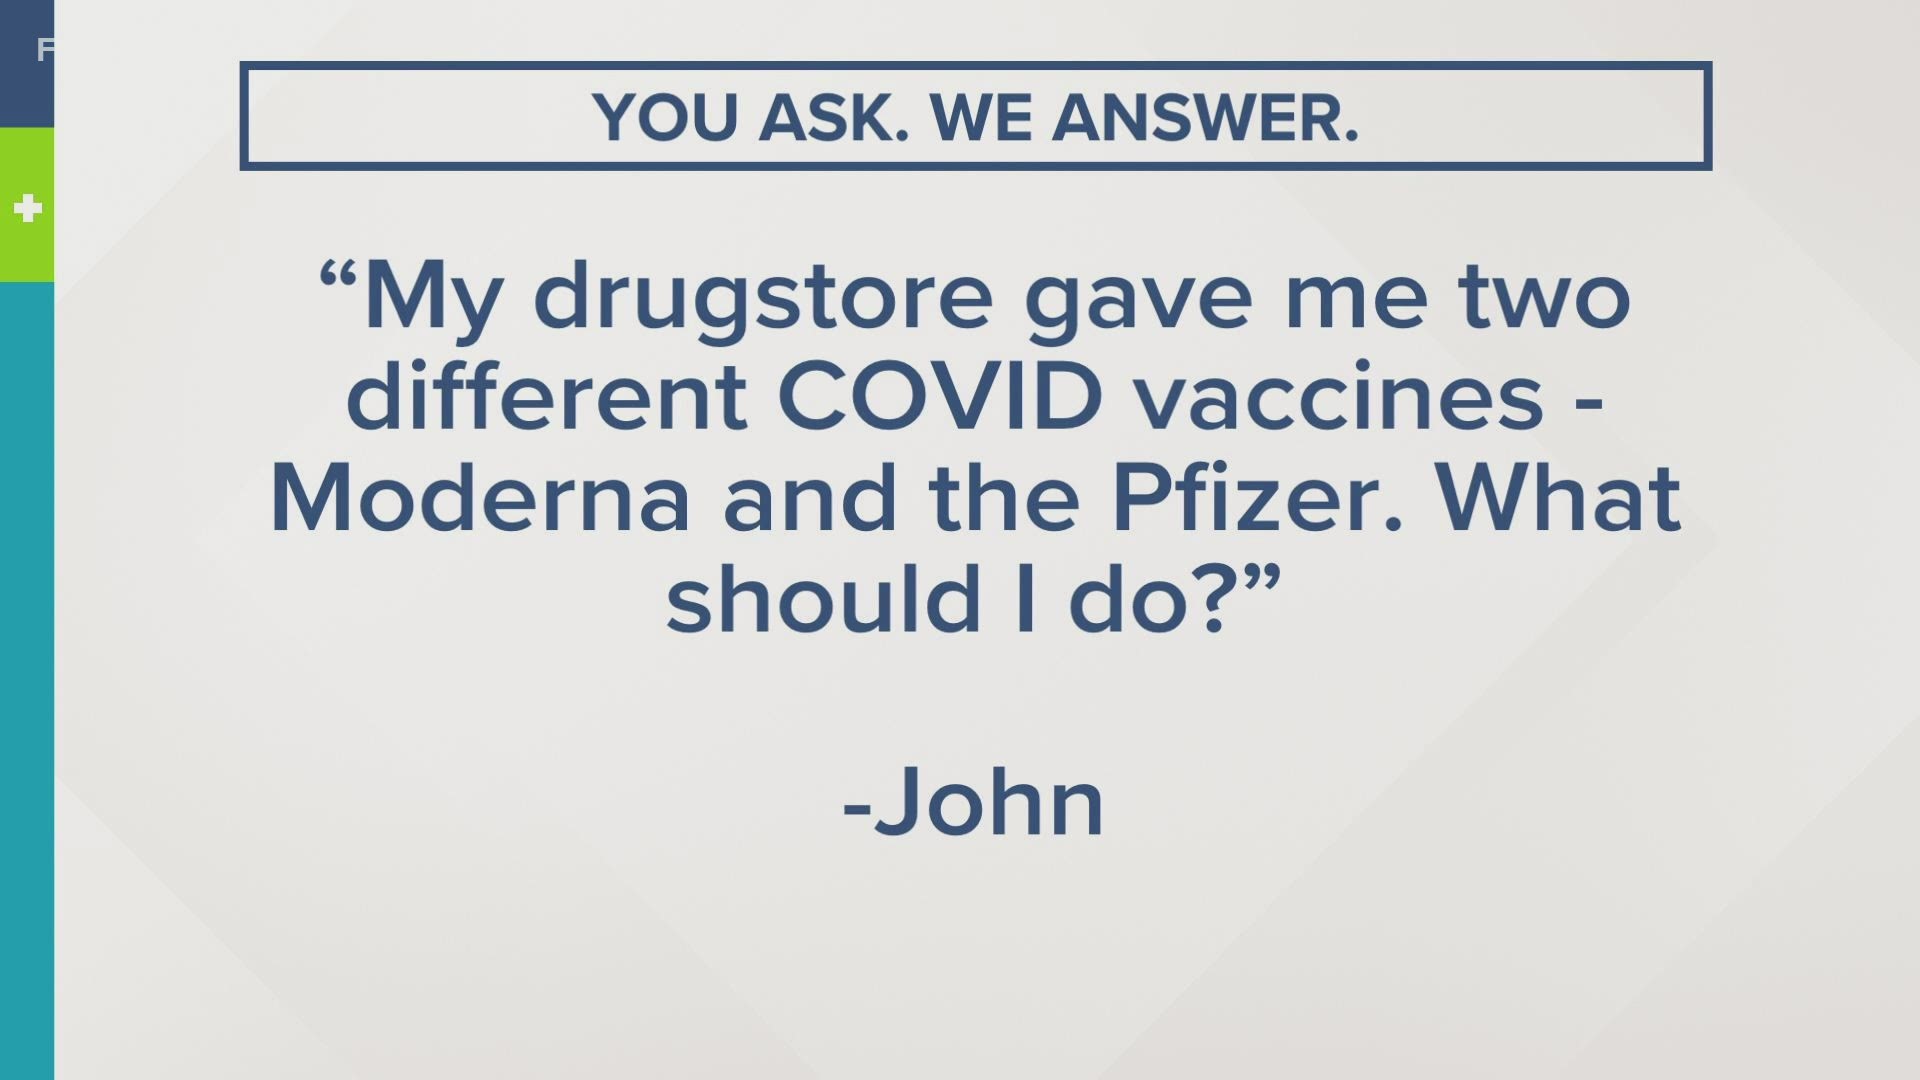 If you have a question about the COVID-19 vaccine, email SHARE61@fox61.com or send a text to 860-527-6161.